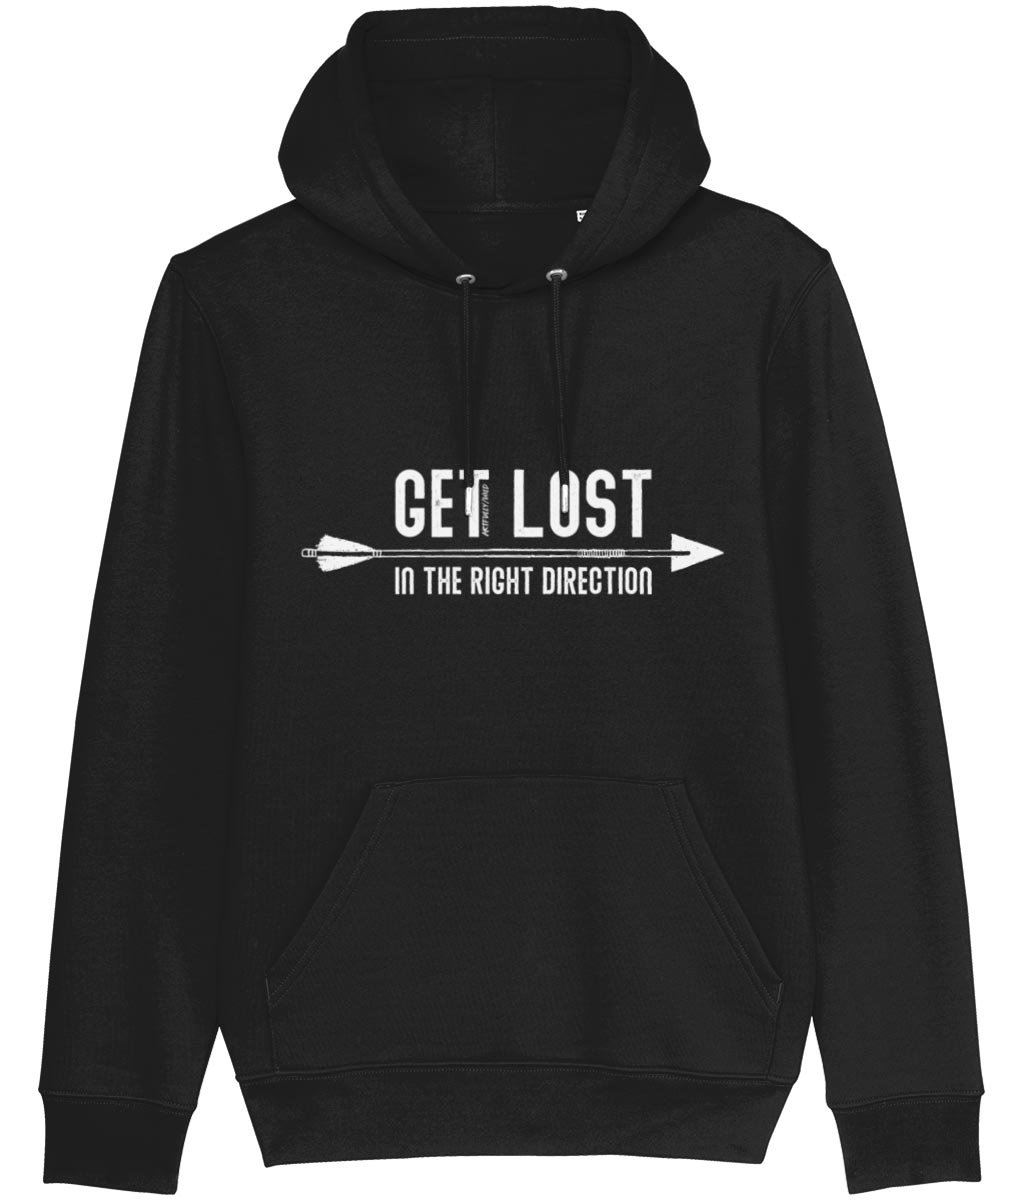 'GET LOST IN THE RIGHT DIRECTION' Black Classic Hoodie. Unisex/Men/Women. Certified Organic Cotton. White Print with water-based Inks. Sustainable Eco-friendly Clothing by Artfully/Wild.lothing by Artfully/Wild.